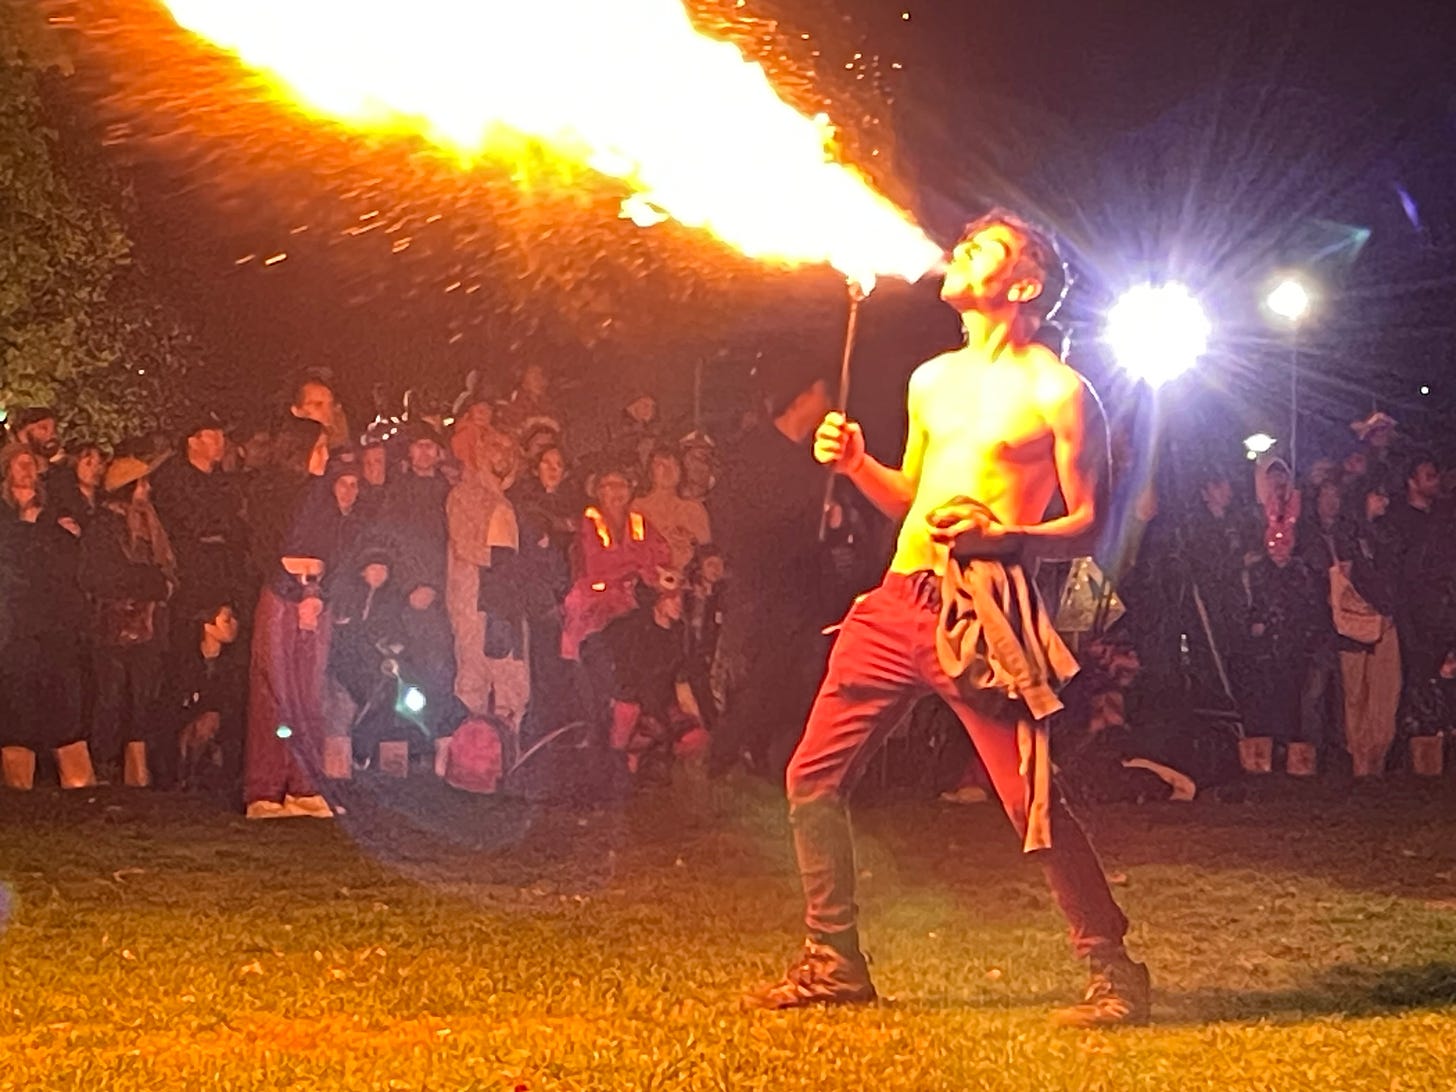 A shirtless man in an open space surrounded by a circle of onlookers as he breathes out a terrific, impressive gust of fire.